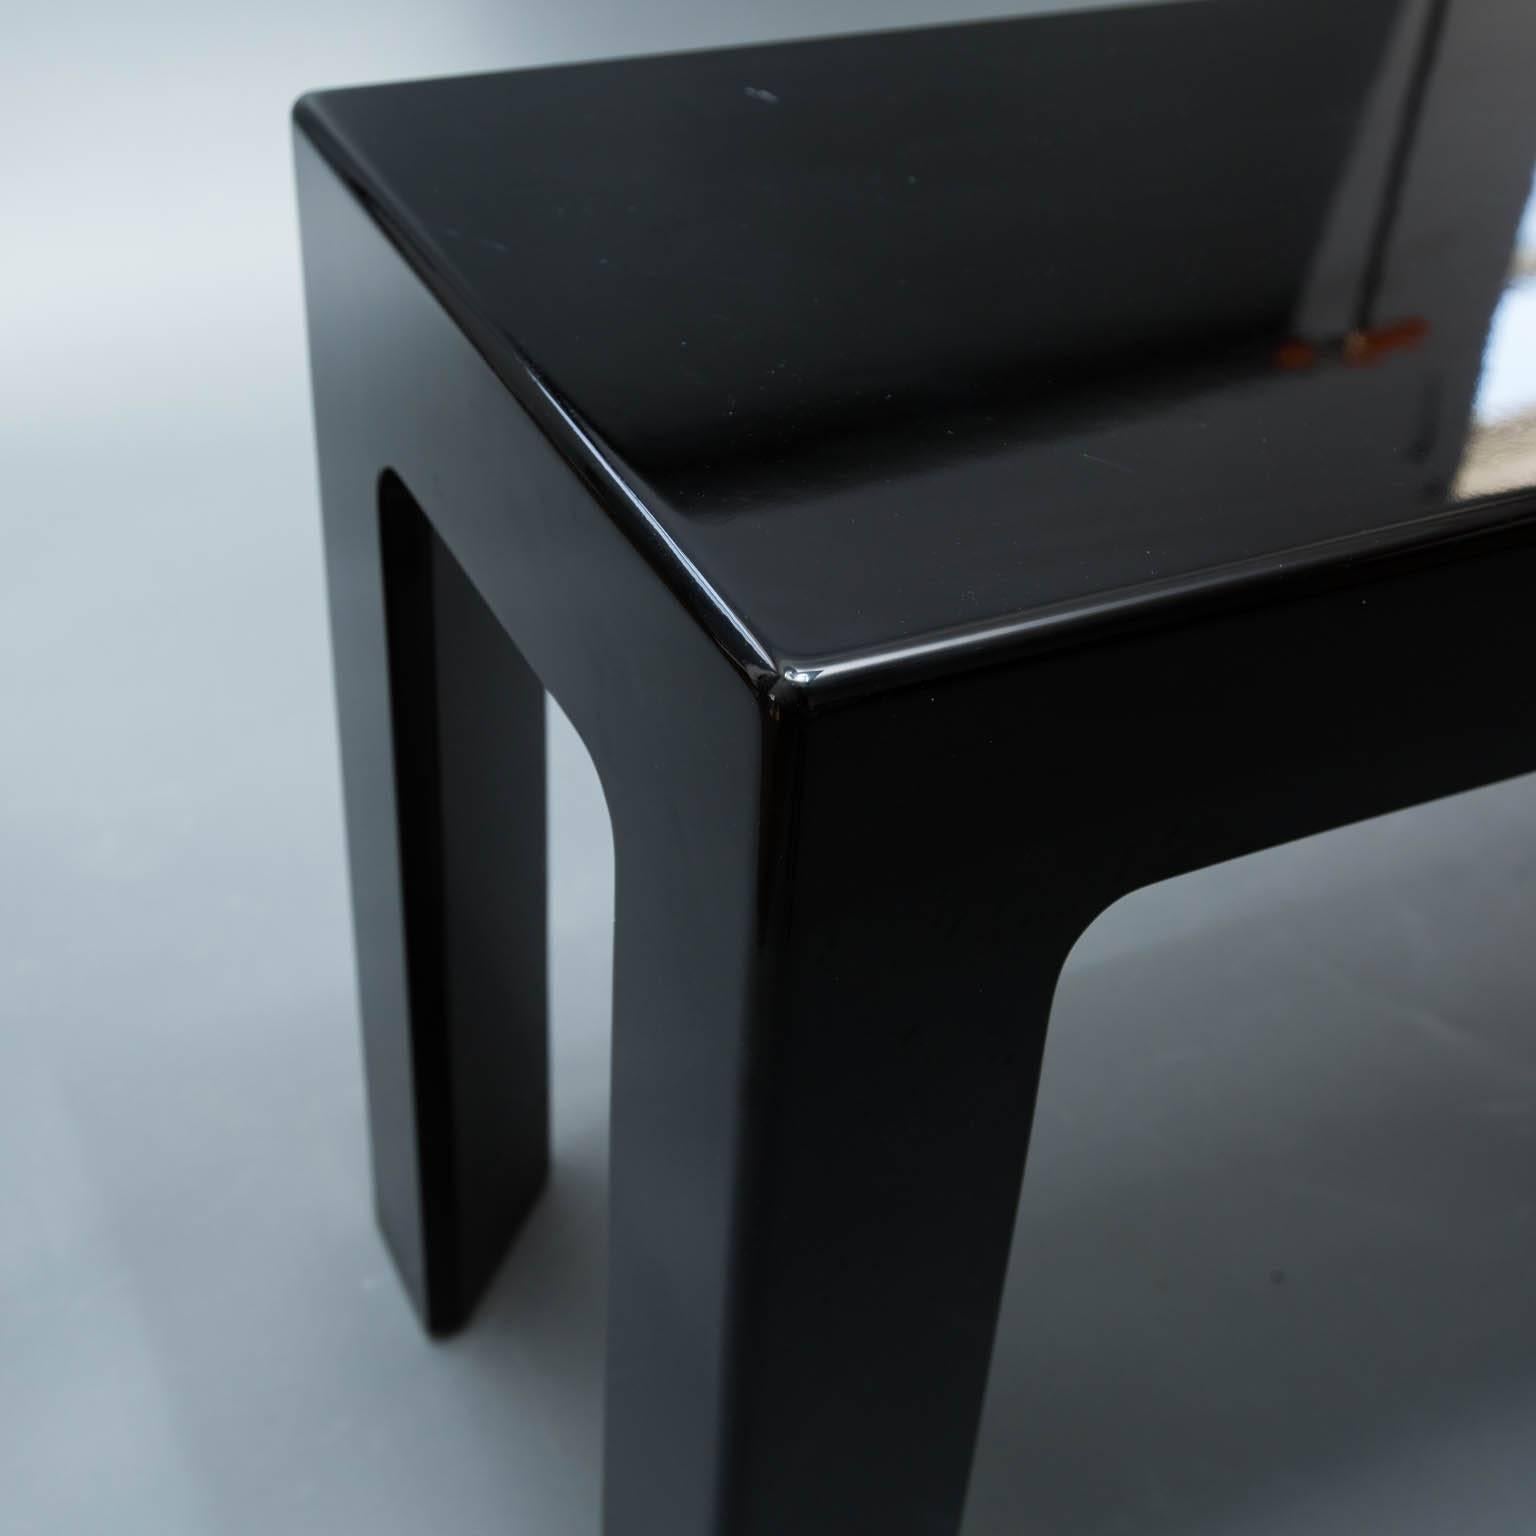 Well-constructed console table with tri-angled legs and an ebony, piano-finished lacquer.